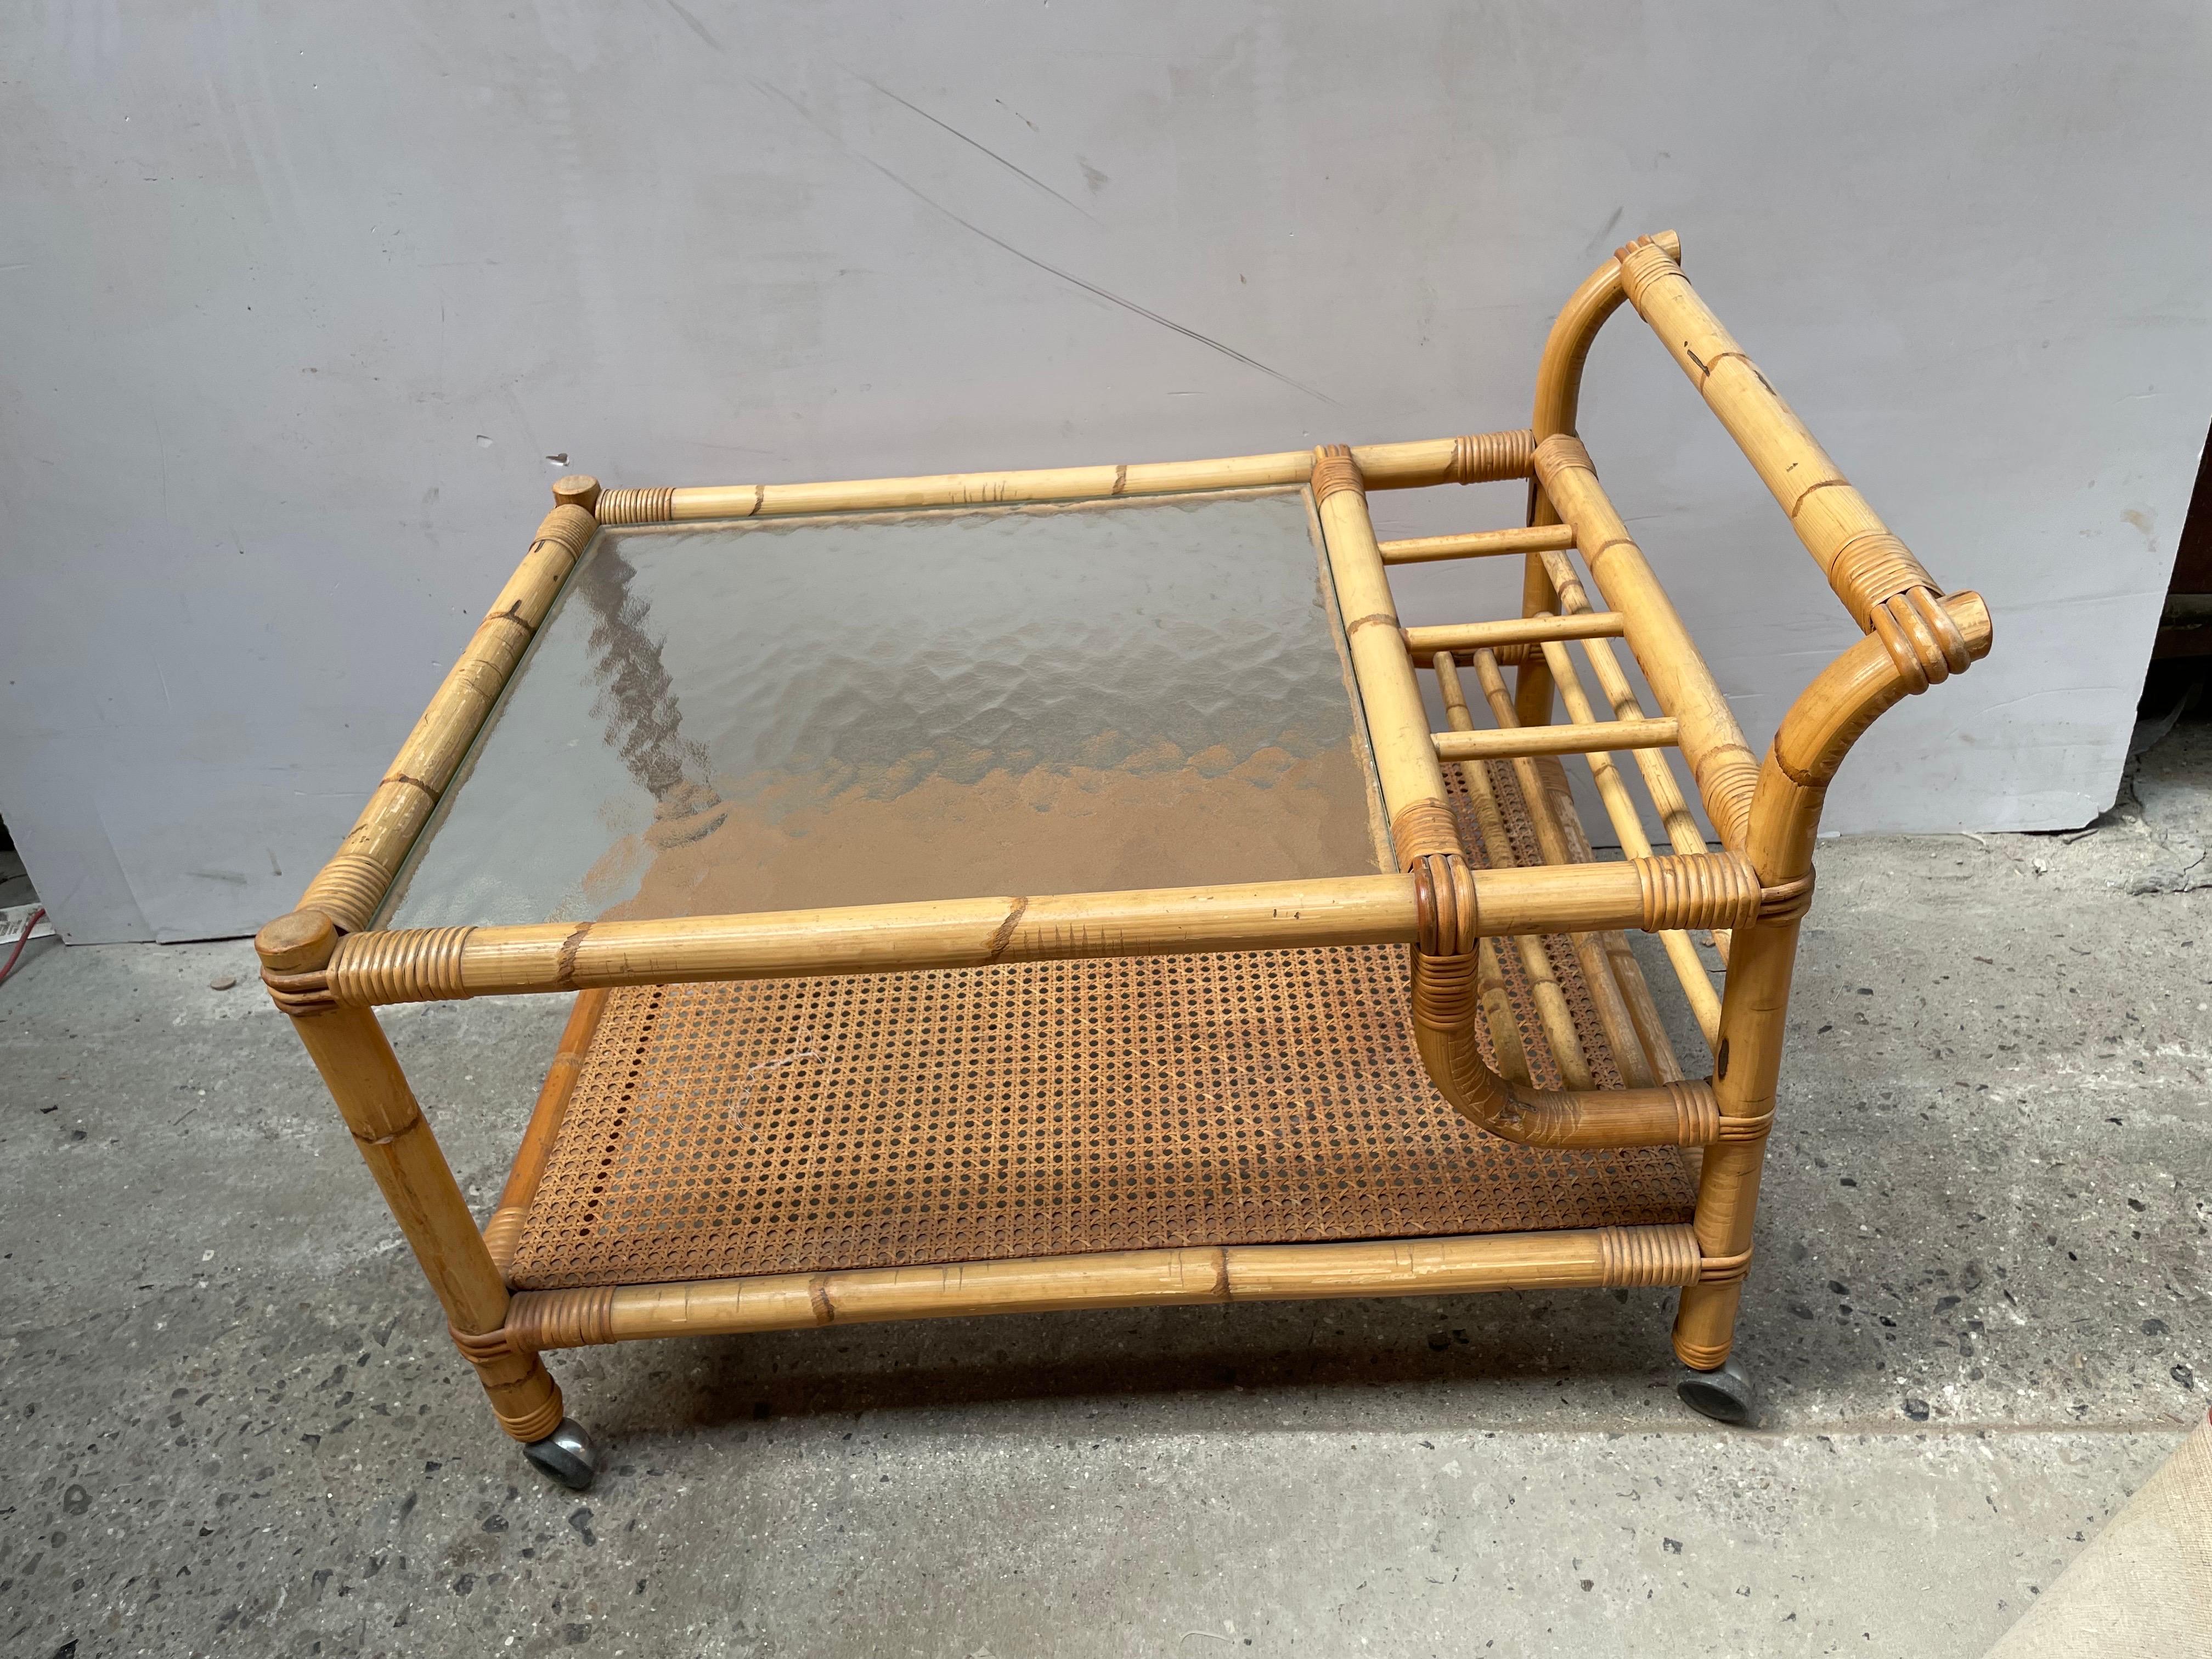 1960s vintage Mid Century Danish Bamboo Rattan Bar Cart. Crafted with exquisite attention to detail, this piece exudes timeless charm and functionality. Its bamboo and rattan construction evokes a sense of natural elegance, while the glass top adds